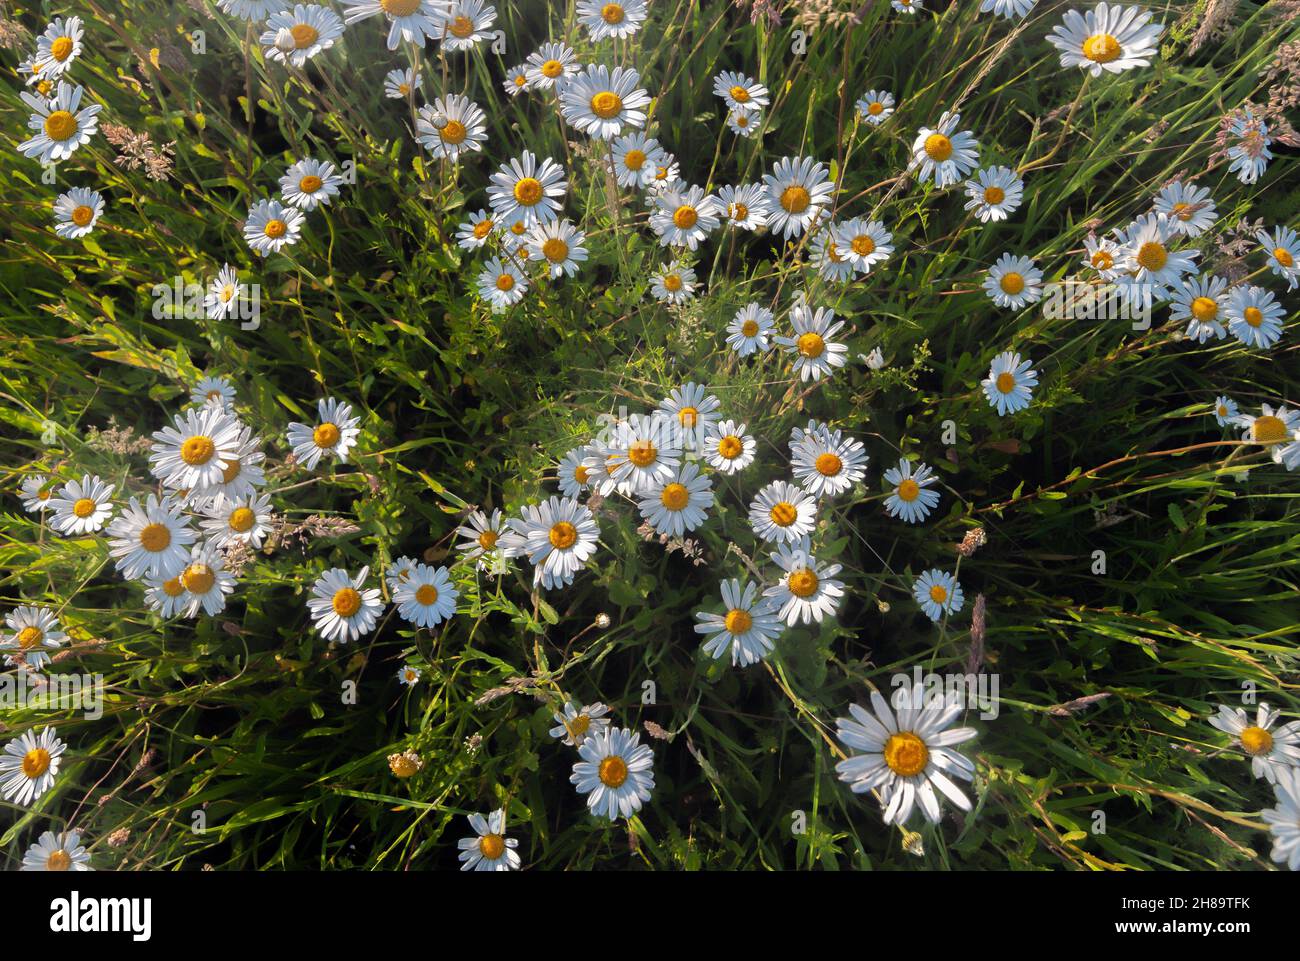 Close up photo of beautiful wild daisies growing in a field Stock Photo